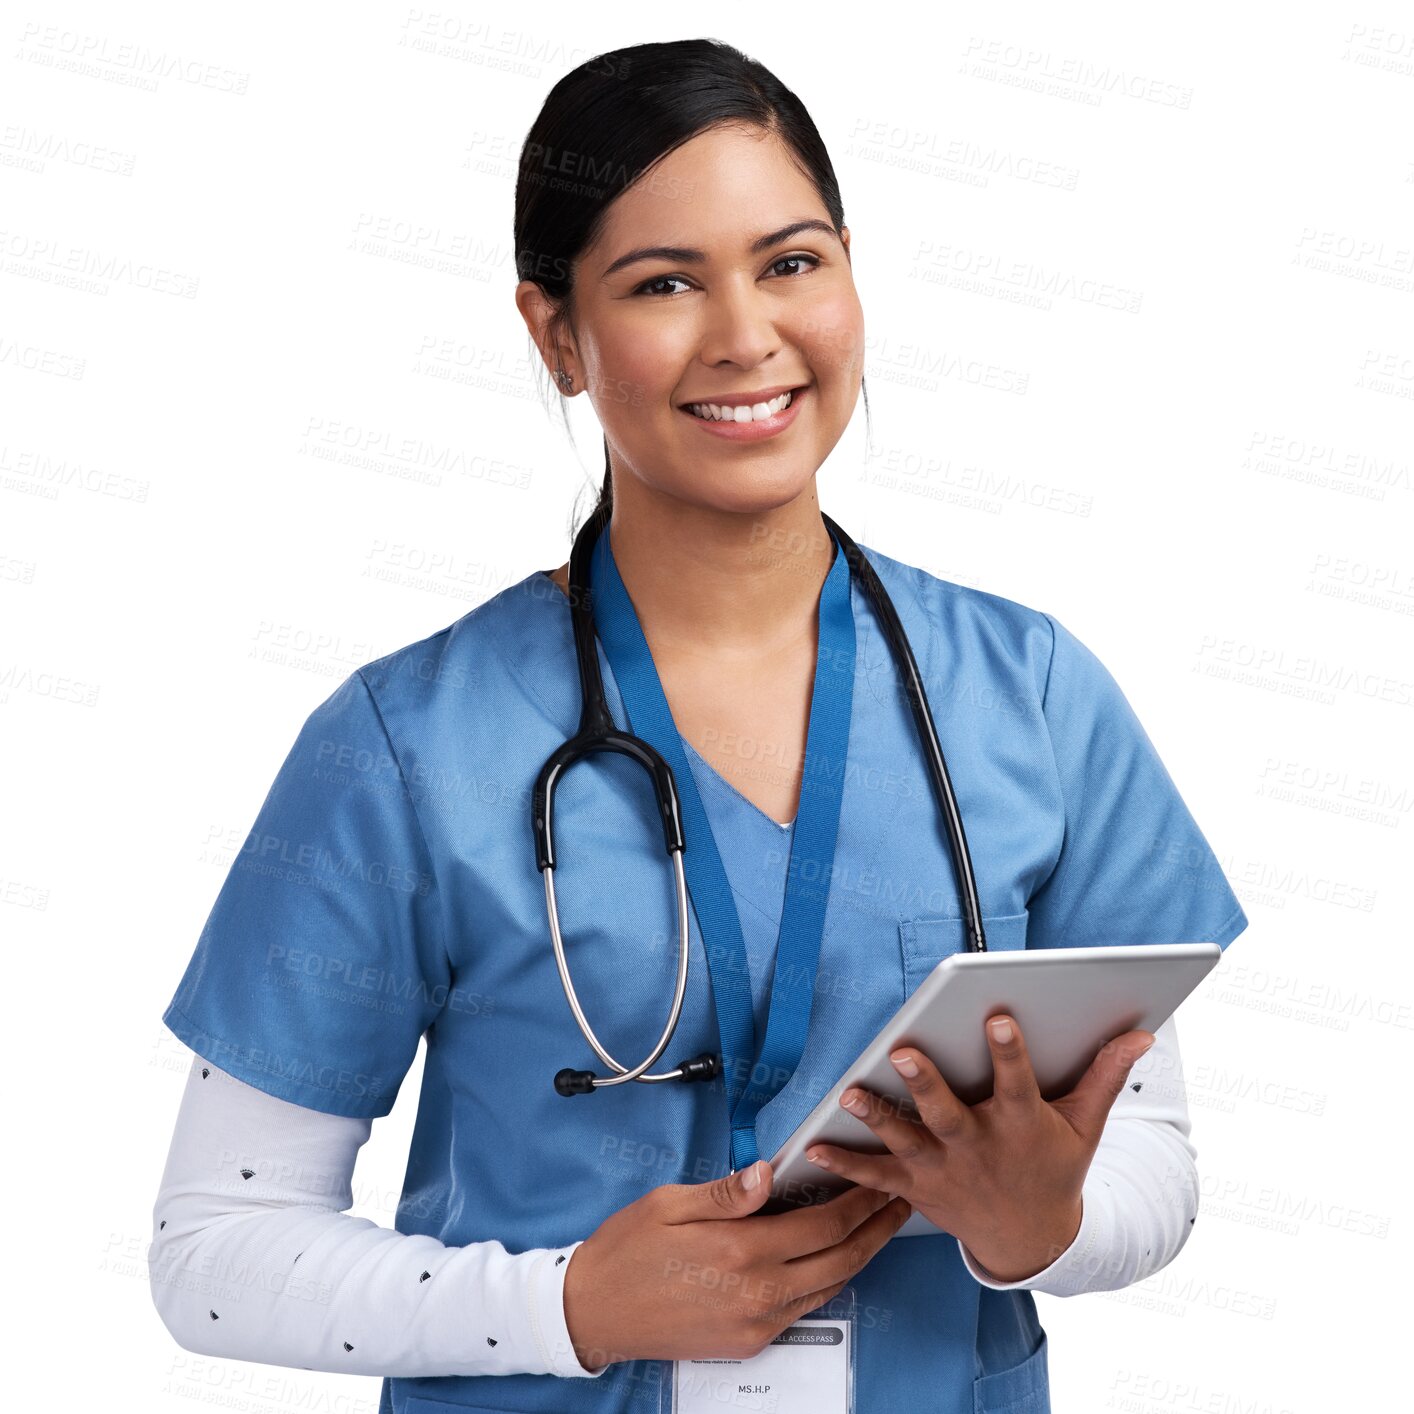 Buy stock photo Healthcare, portrait of a doctor woman with tablet and isolated against a transparent png background. Medical research, data review or information and happy or excited young female nurse or surgeon 